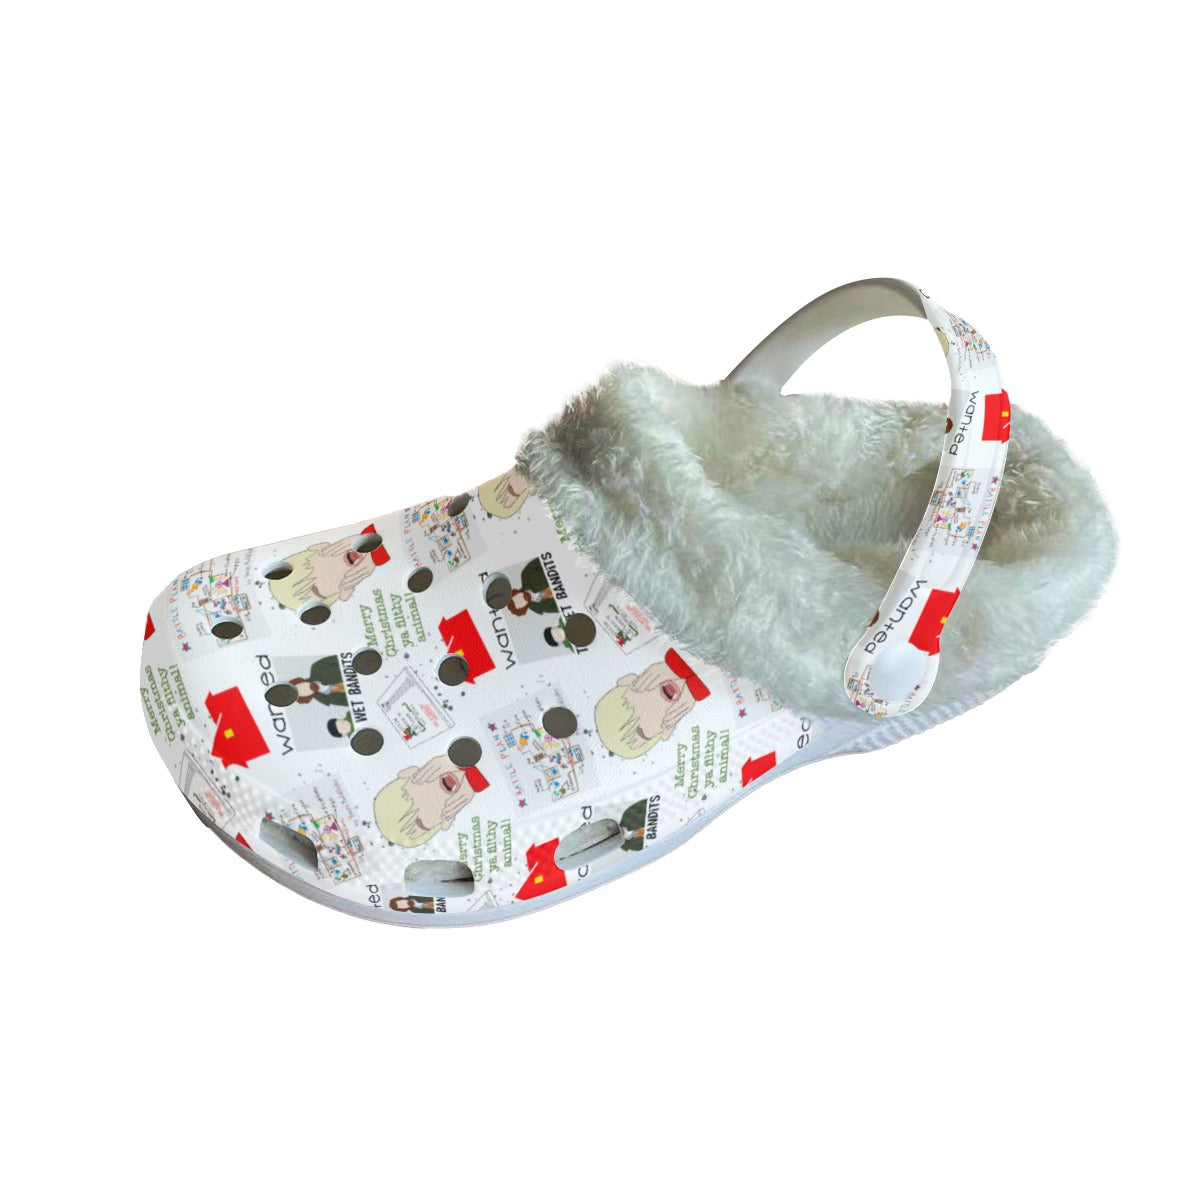 Home alone Women's Classic Clogs with Fleece  100% removable fleece